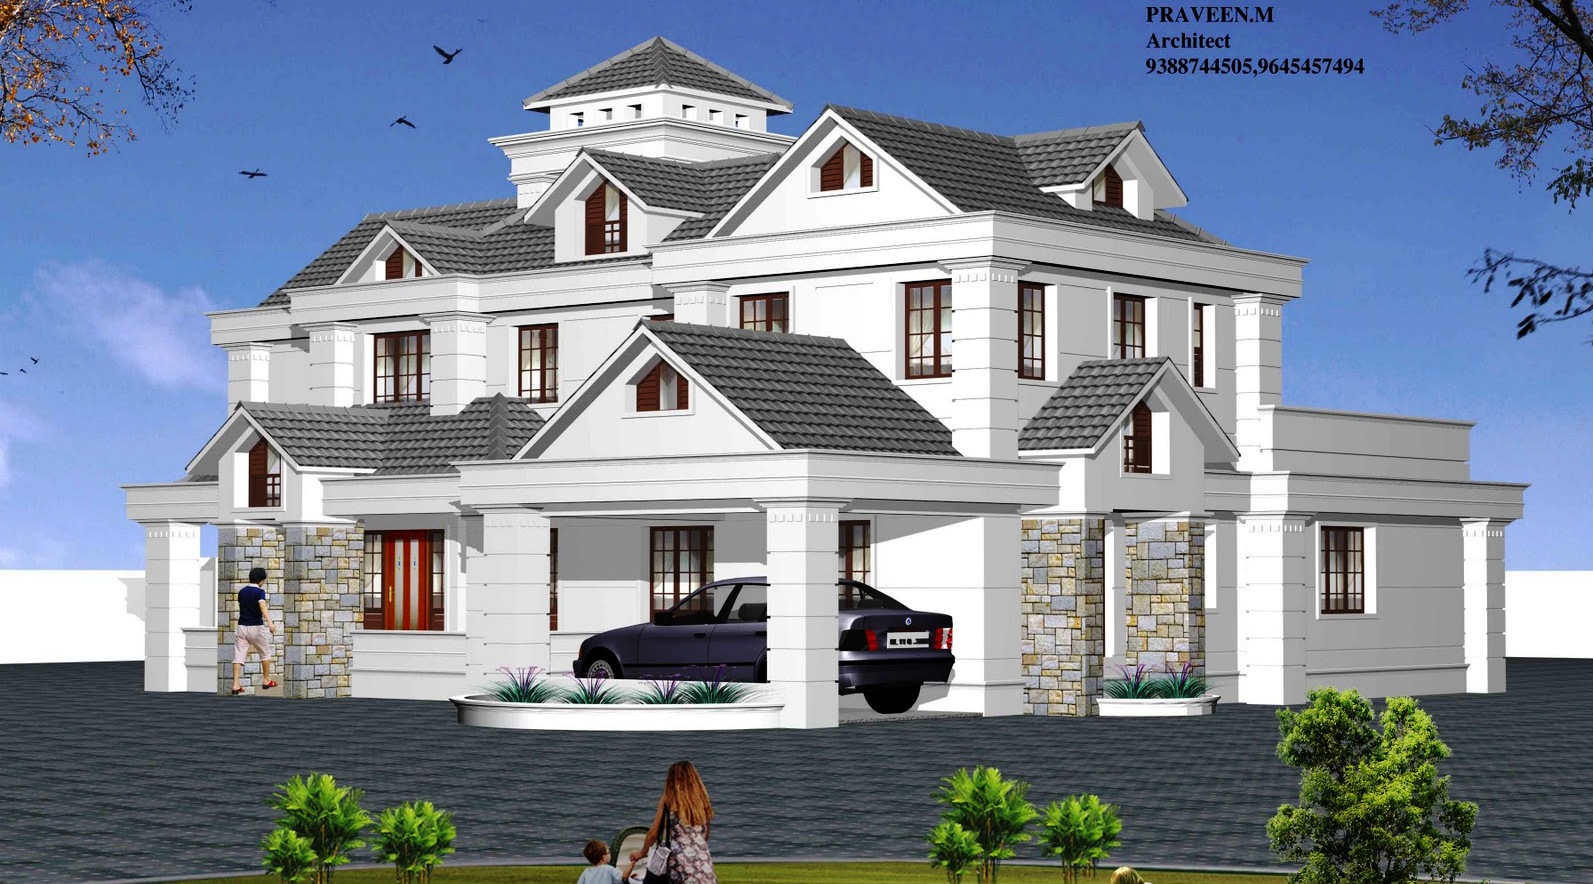 Bedroom House Designs India on Types House Plans   Architectural Design   Apnaghar